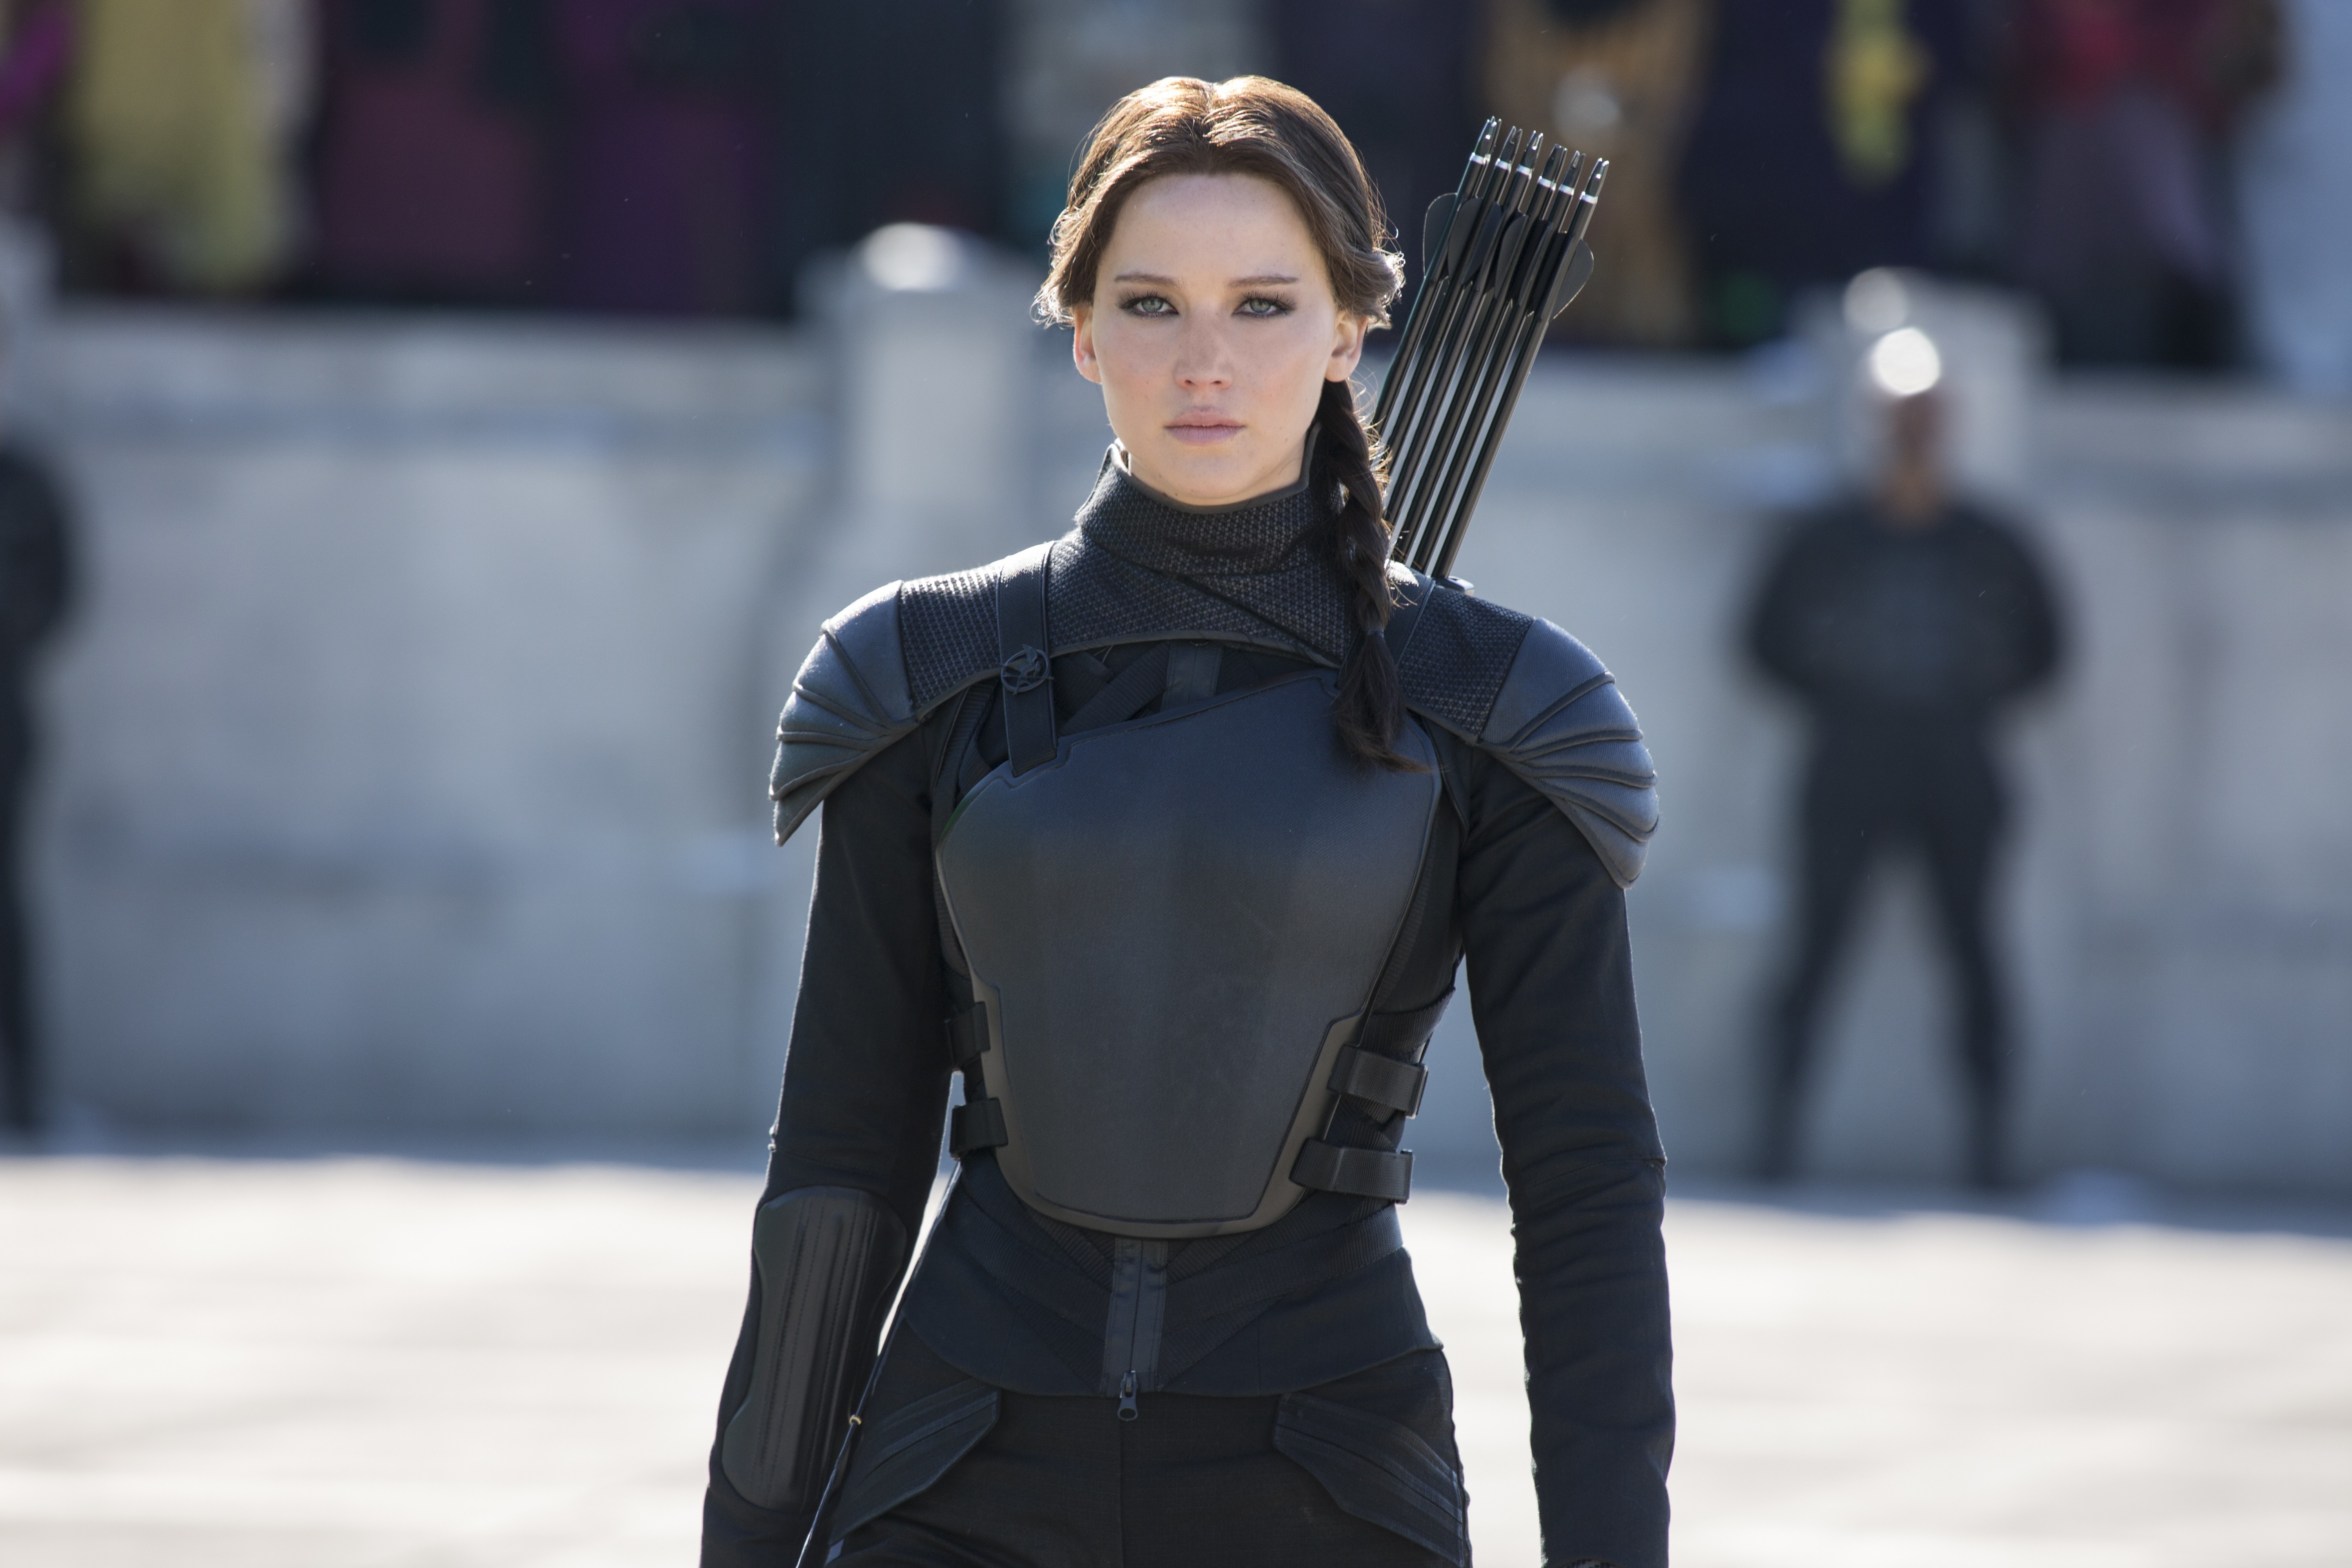 Women Archers Jennifer Lawrence The Hunger Games Wallpapers Hd Desktop And Mobile Backgrounds 